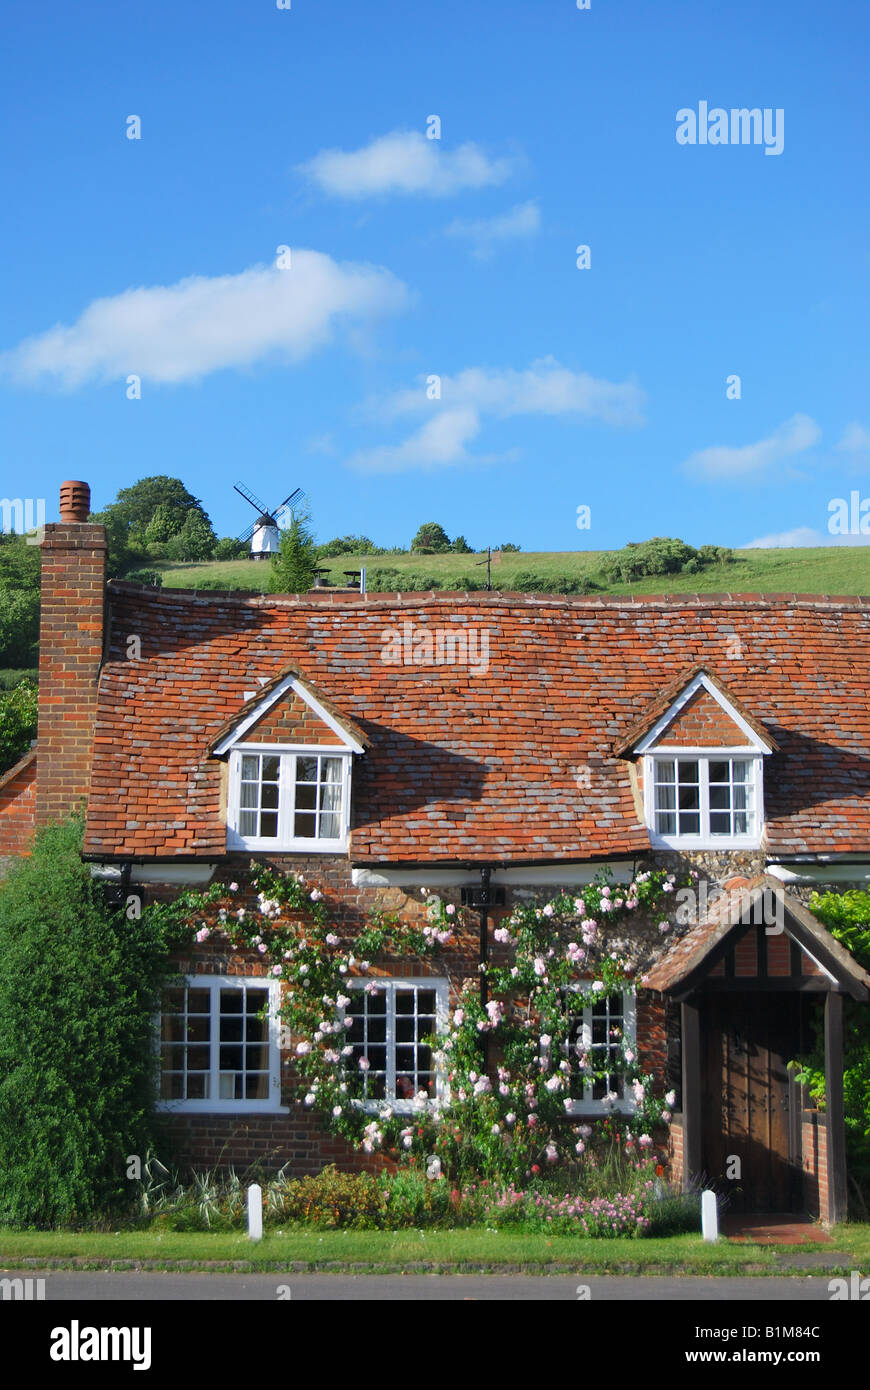 Picturesque cottage in village centre, Turville, Buckinghamshire, England, United Kingdom Stock Photo